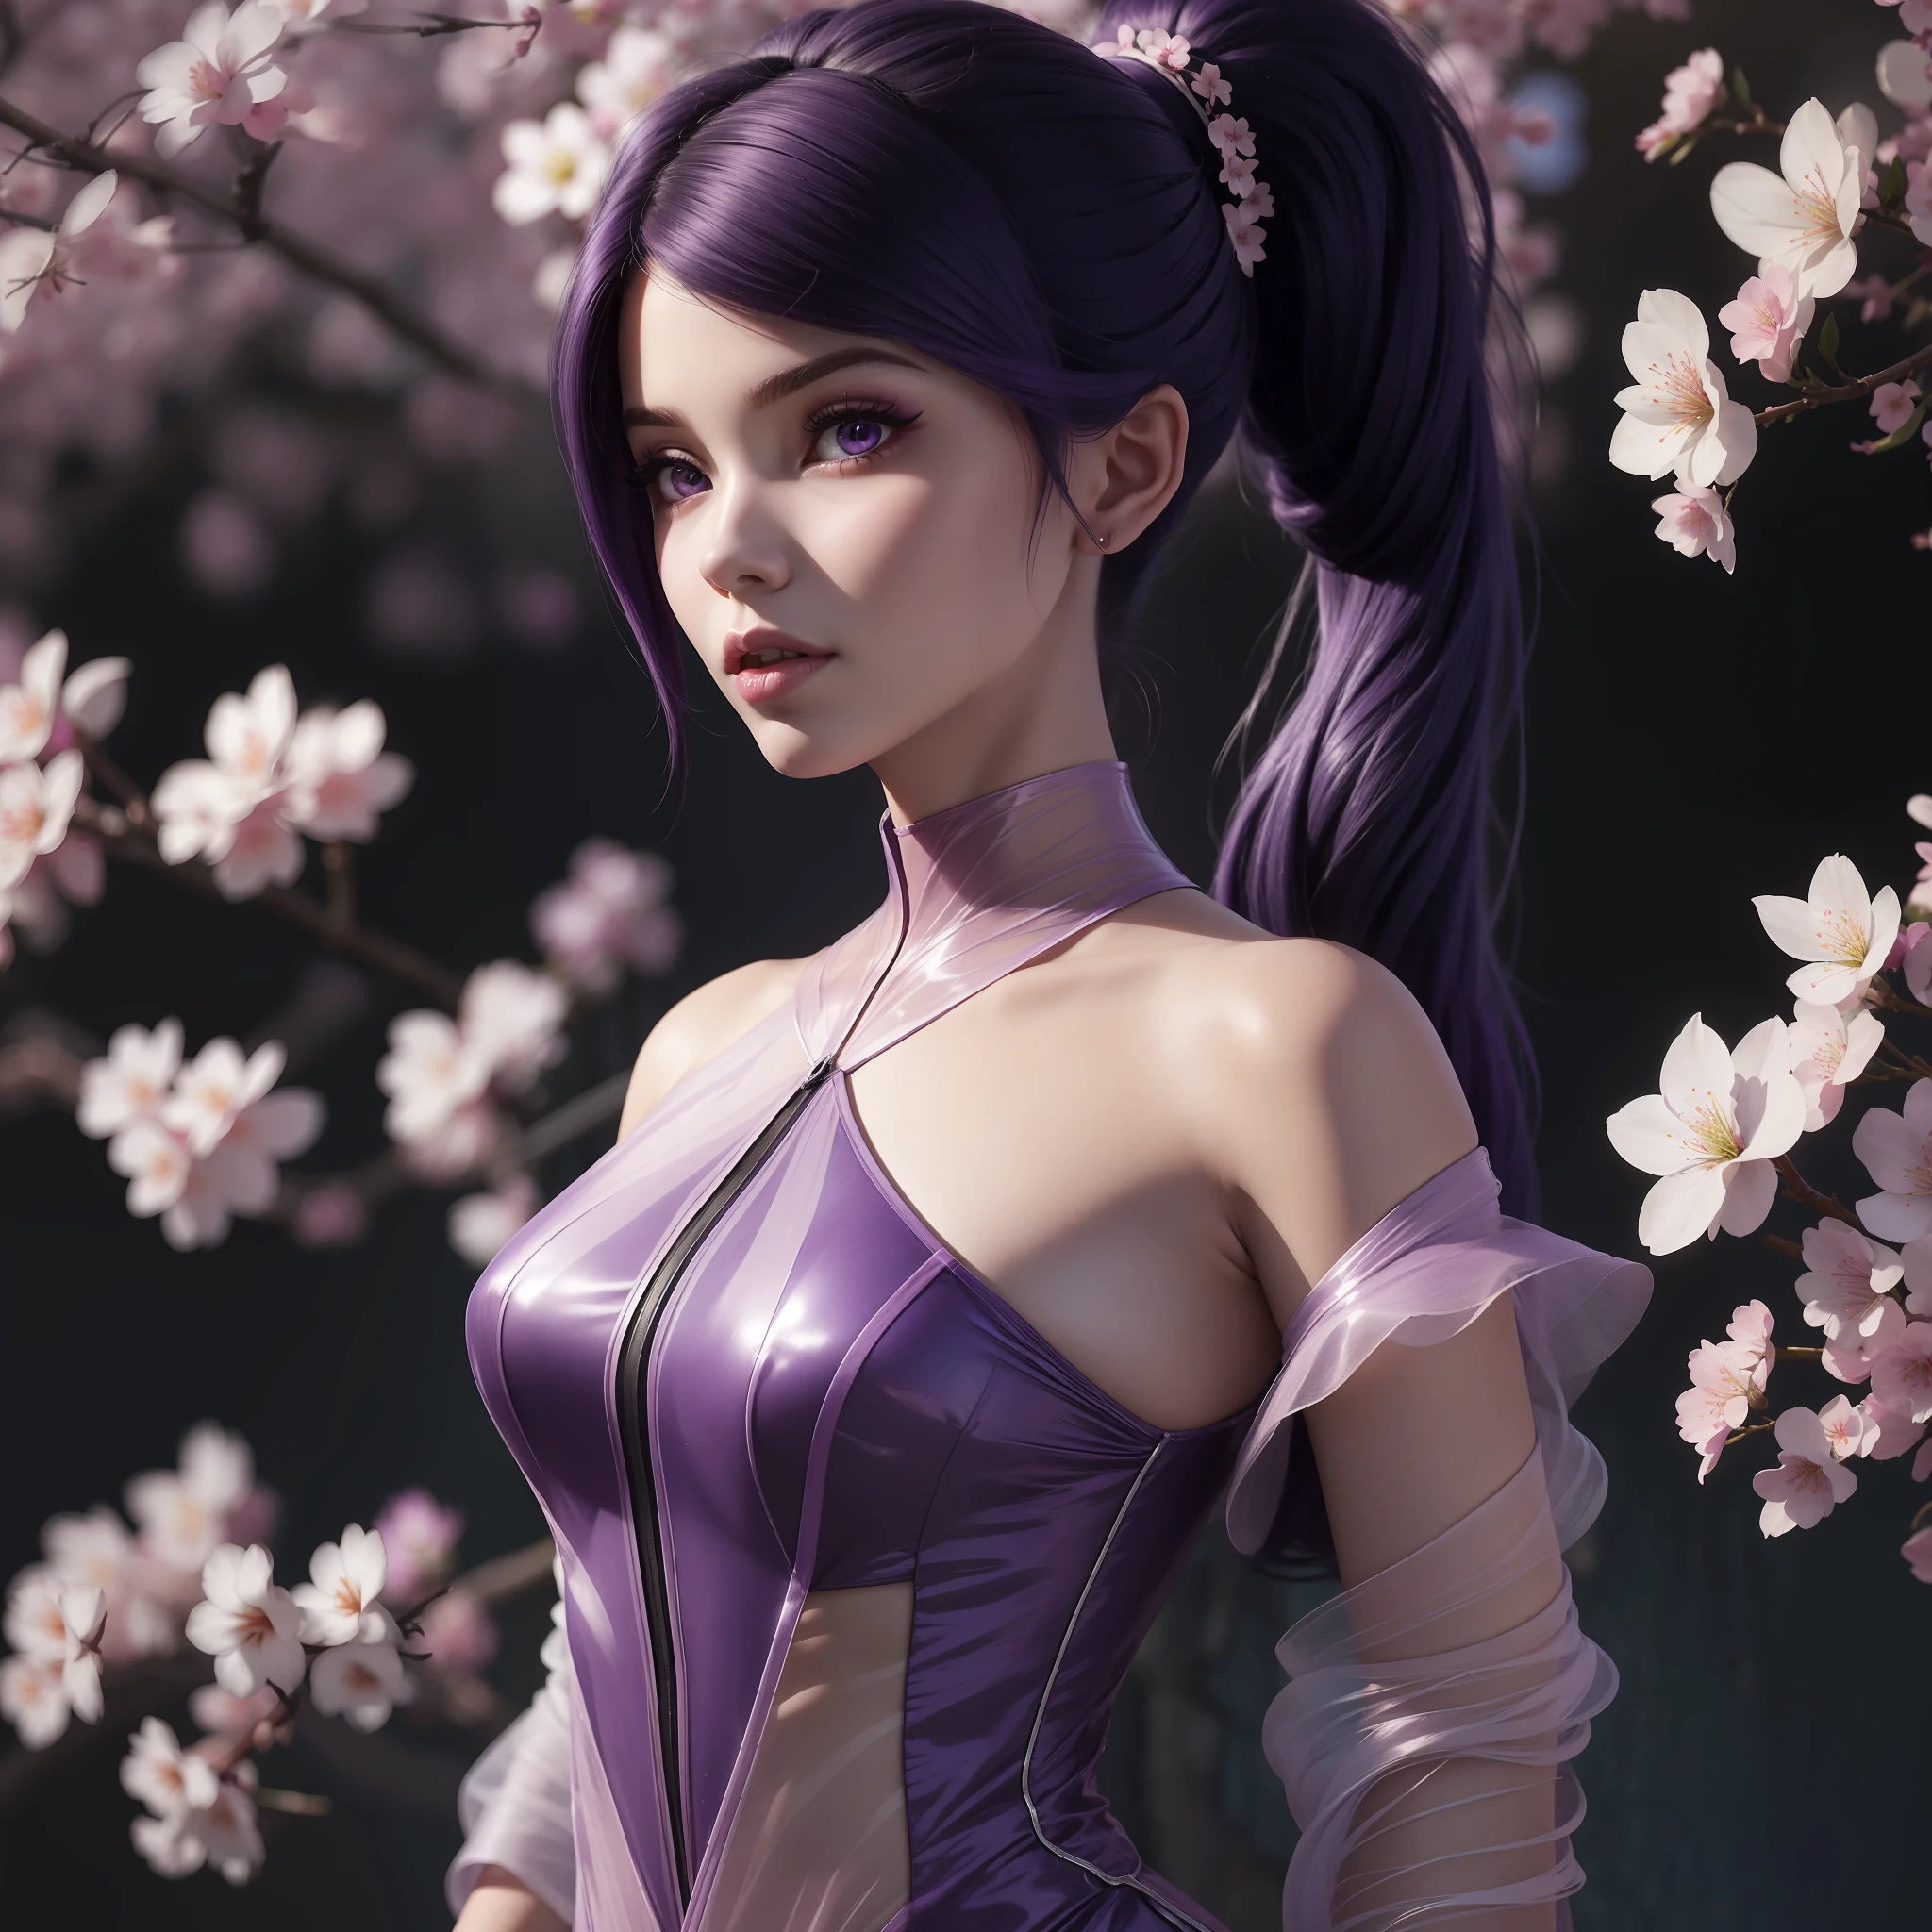 Vidia beautiful purple hair ponytail on neon background purple eyes with transparent dress ultra detailed very realistic high definition with bare shoulders cherry blossom everywhere cherry blossoms surround her